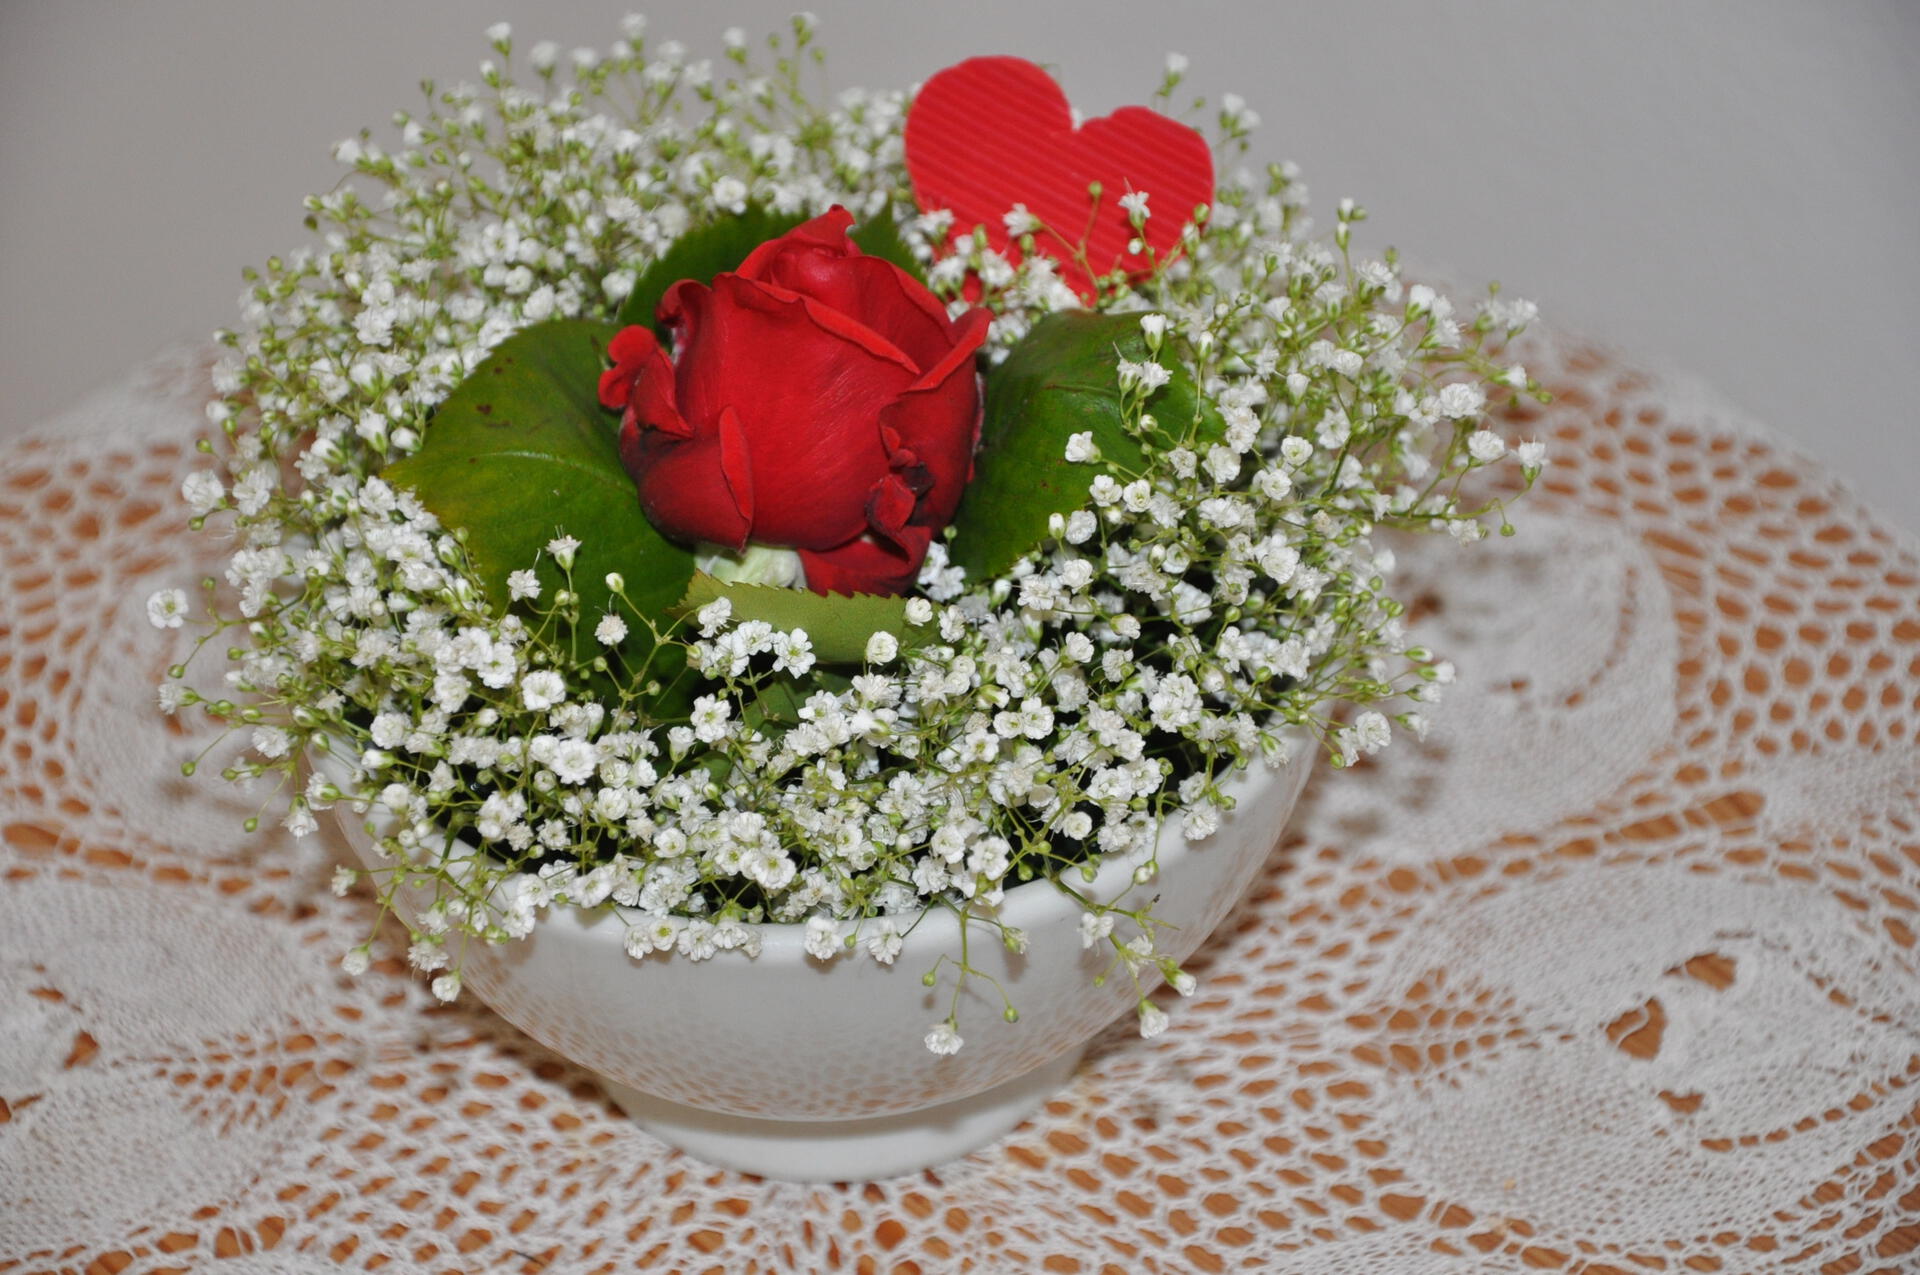 Rose decorated in bowl